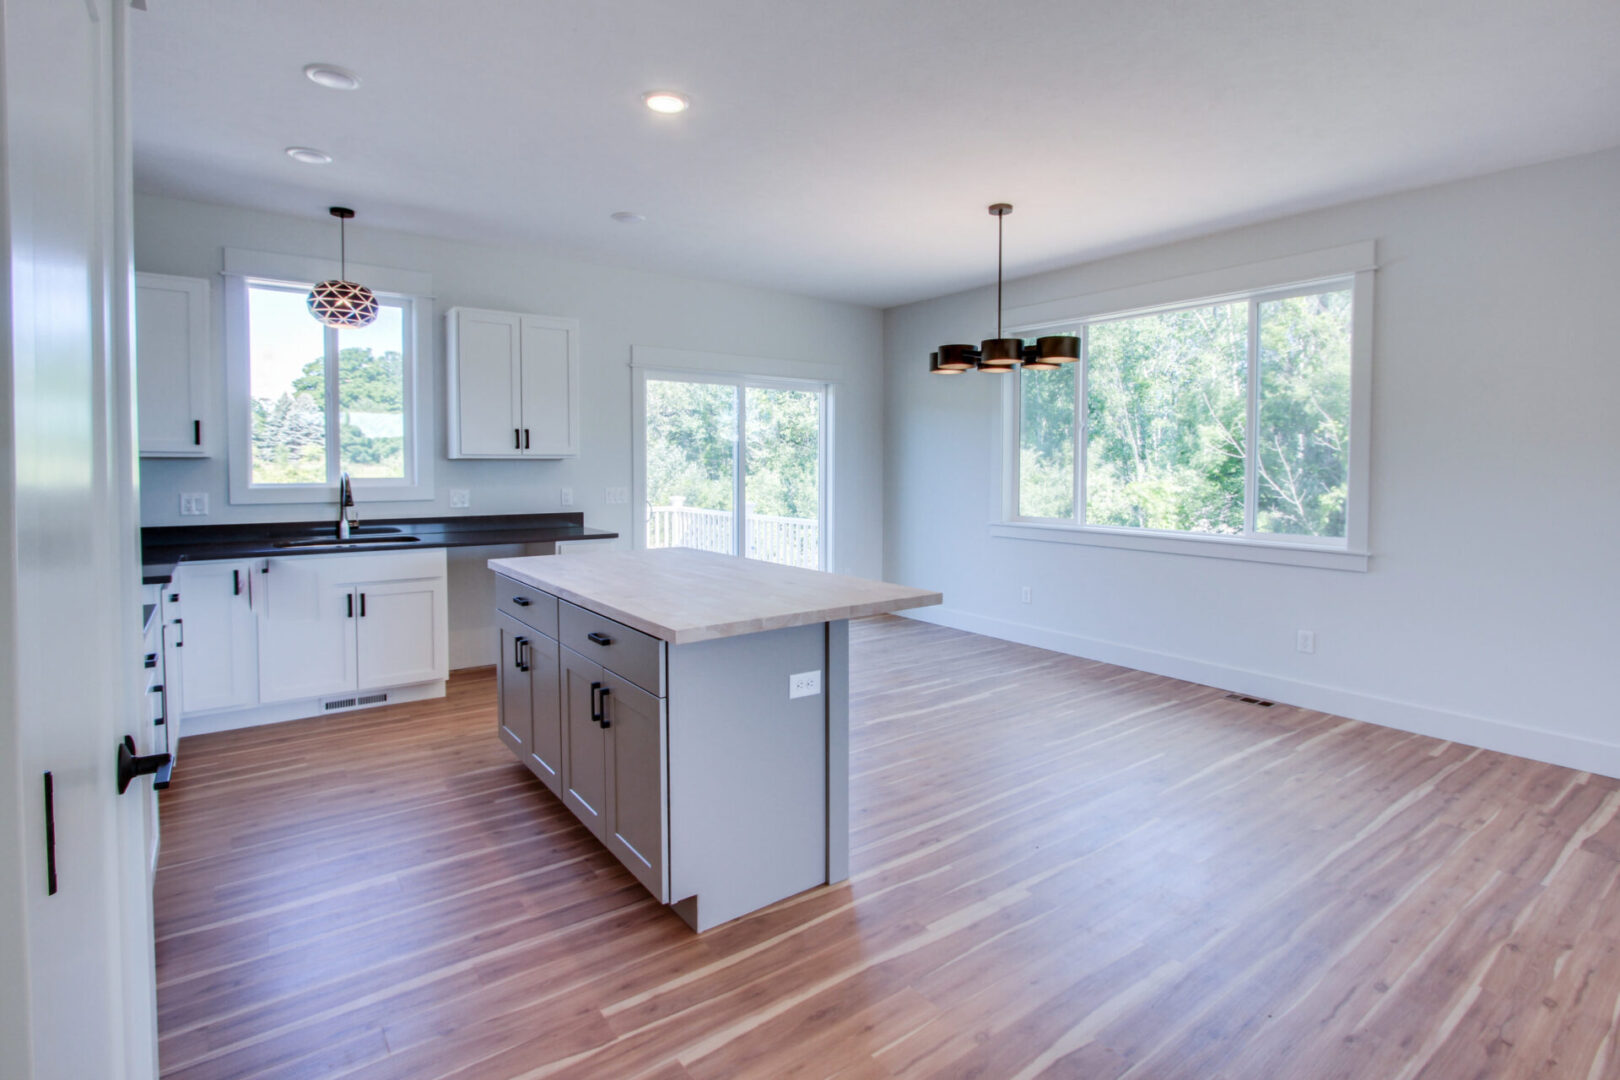 A spacious kitchen with white walls, large windows, and wooden floors